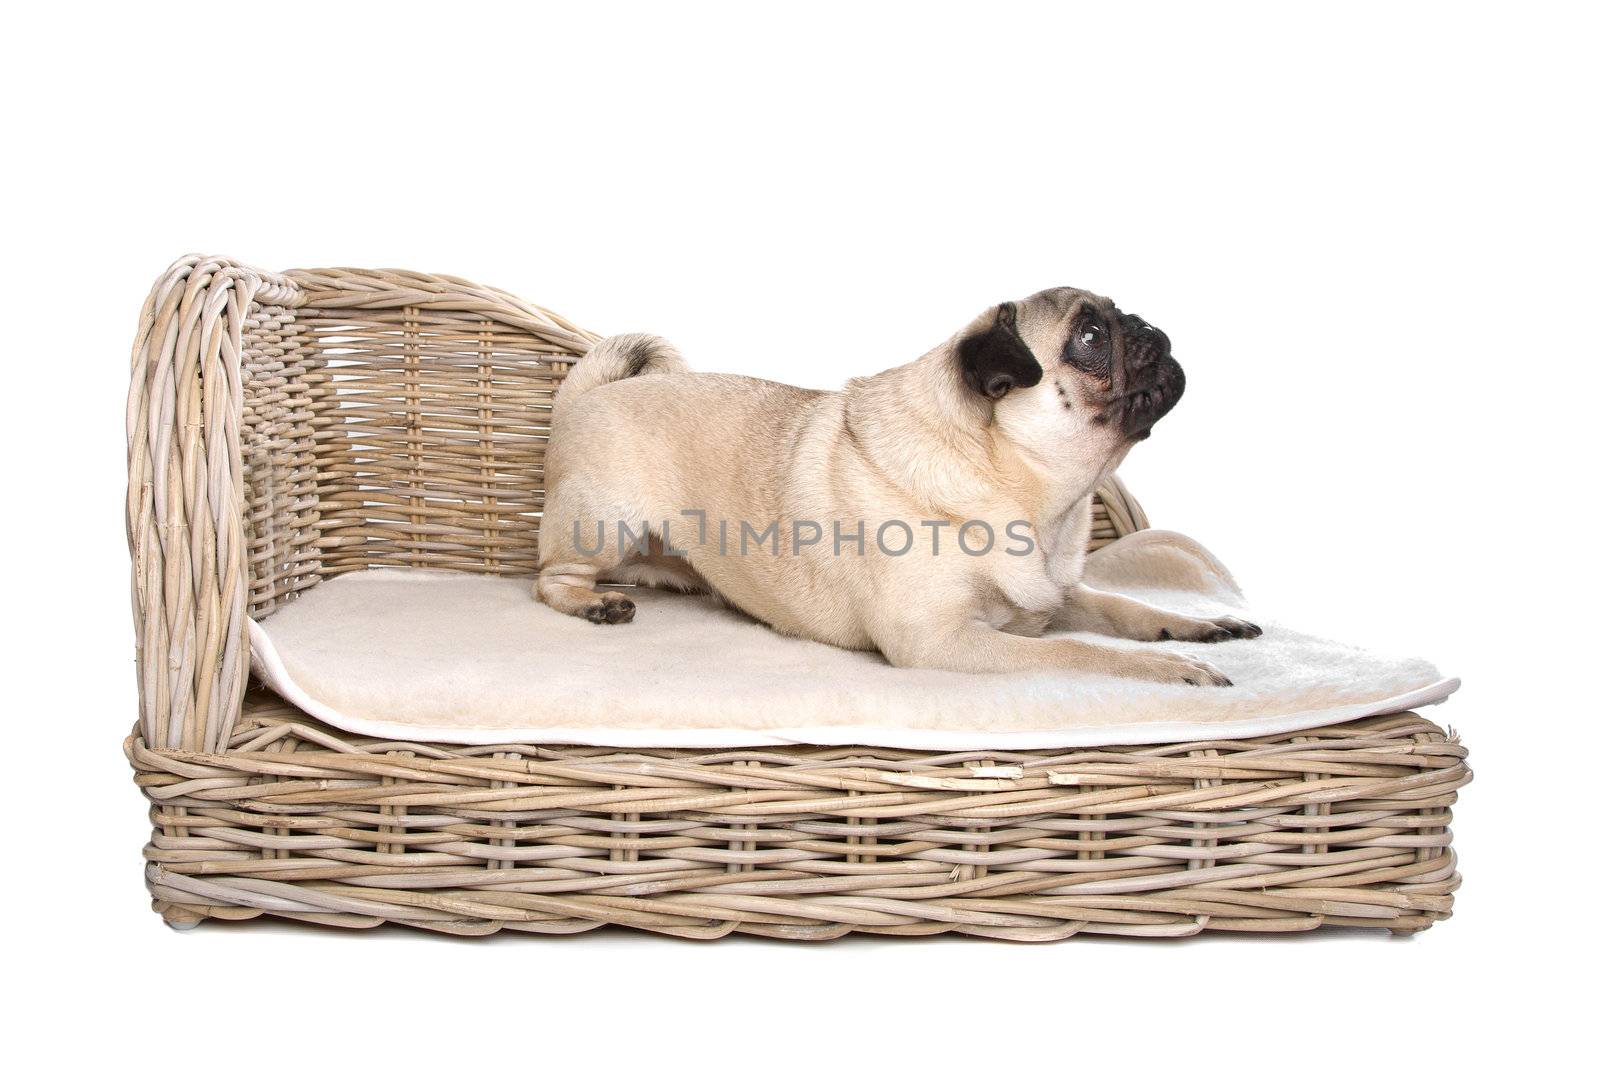 Pug on a luxury bed in front of a white background